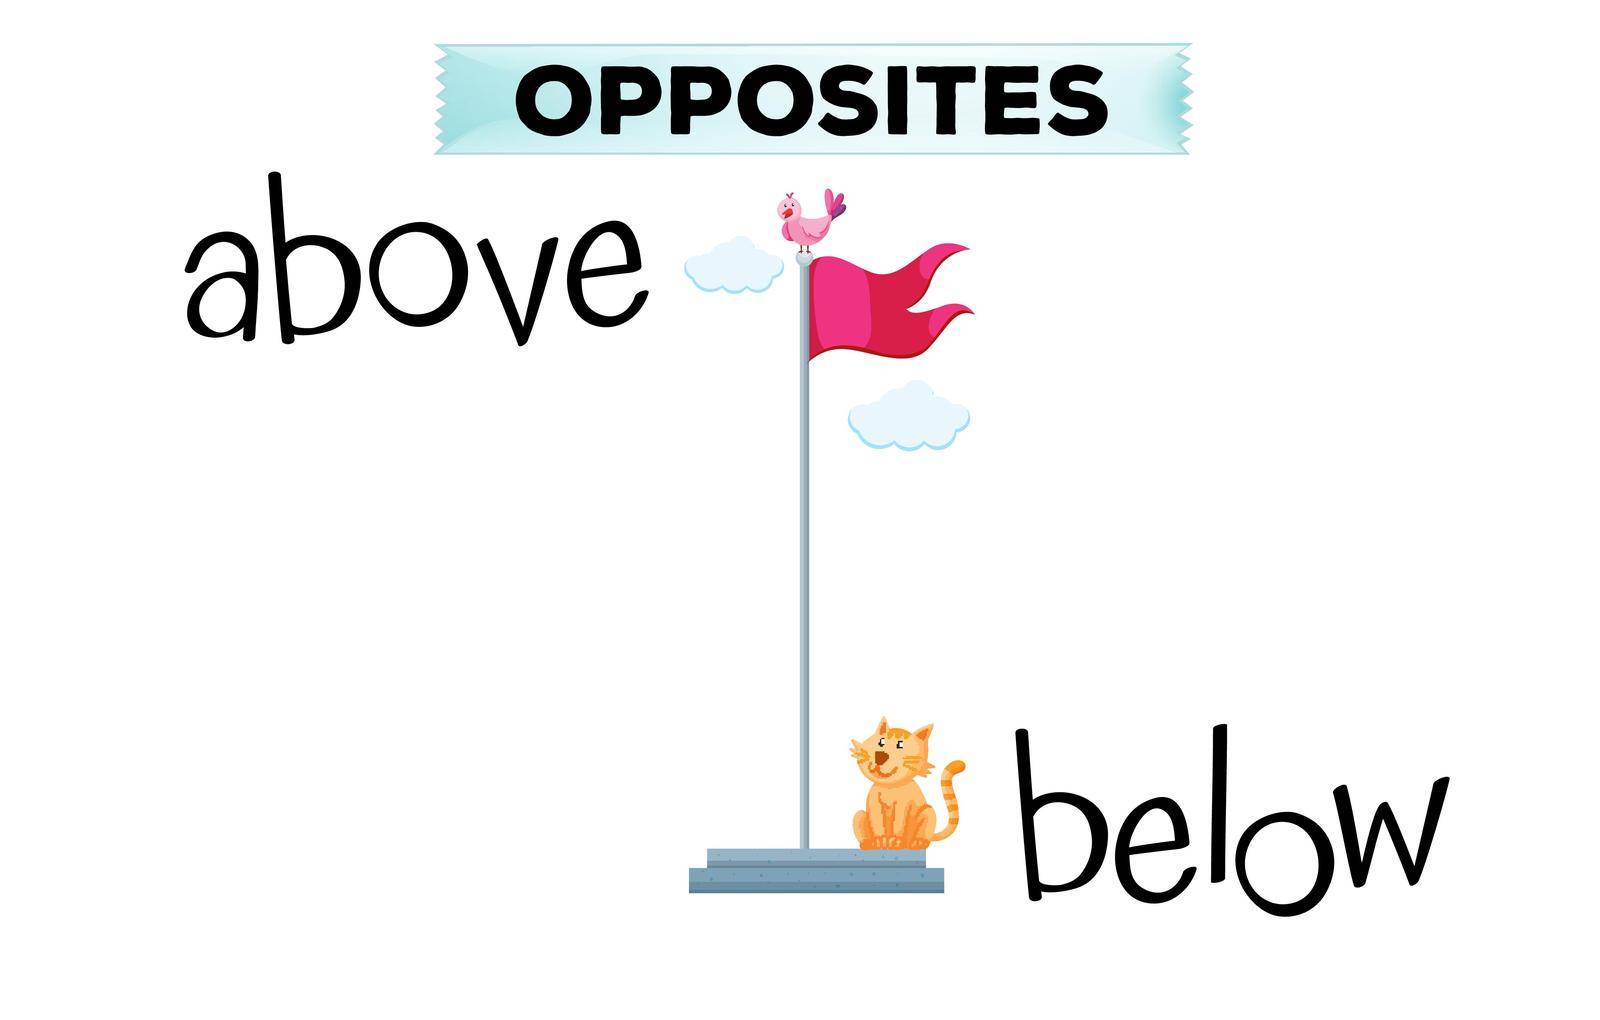 Opposite words for above and below by iimages